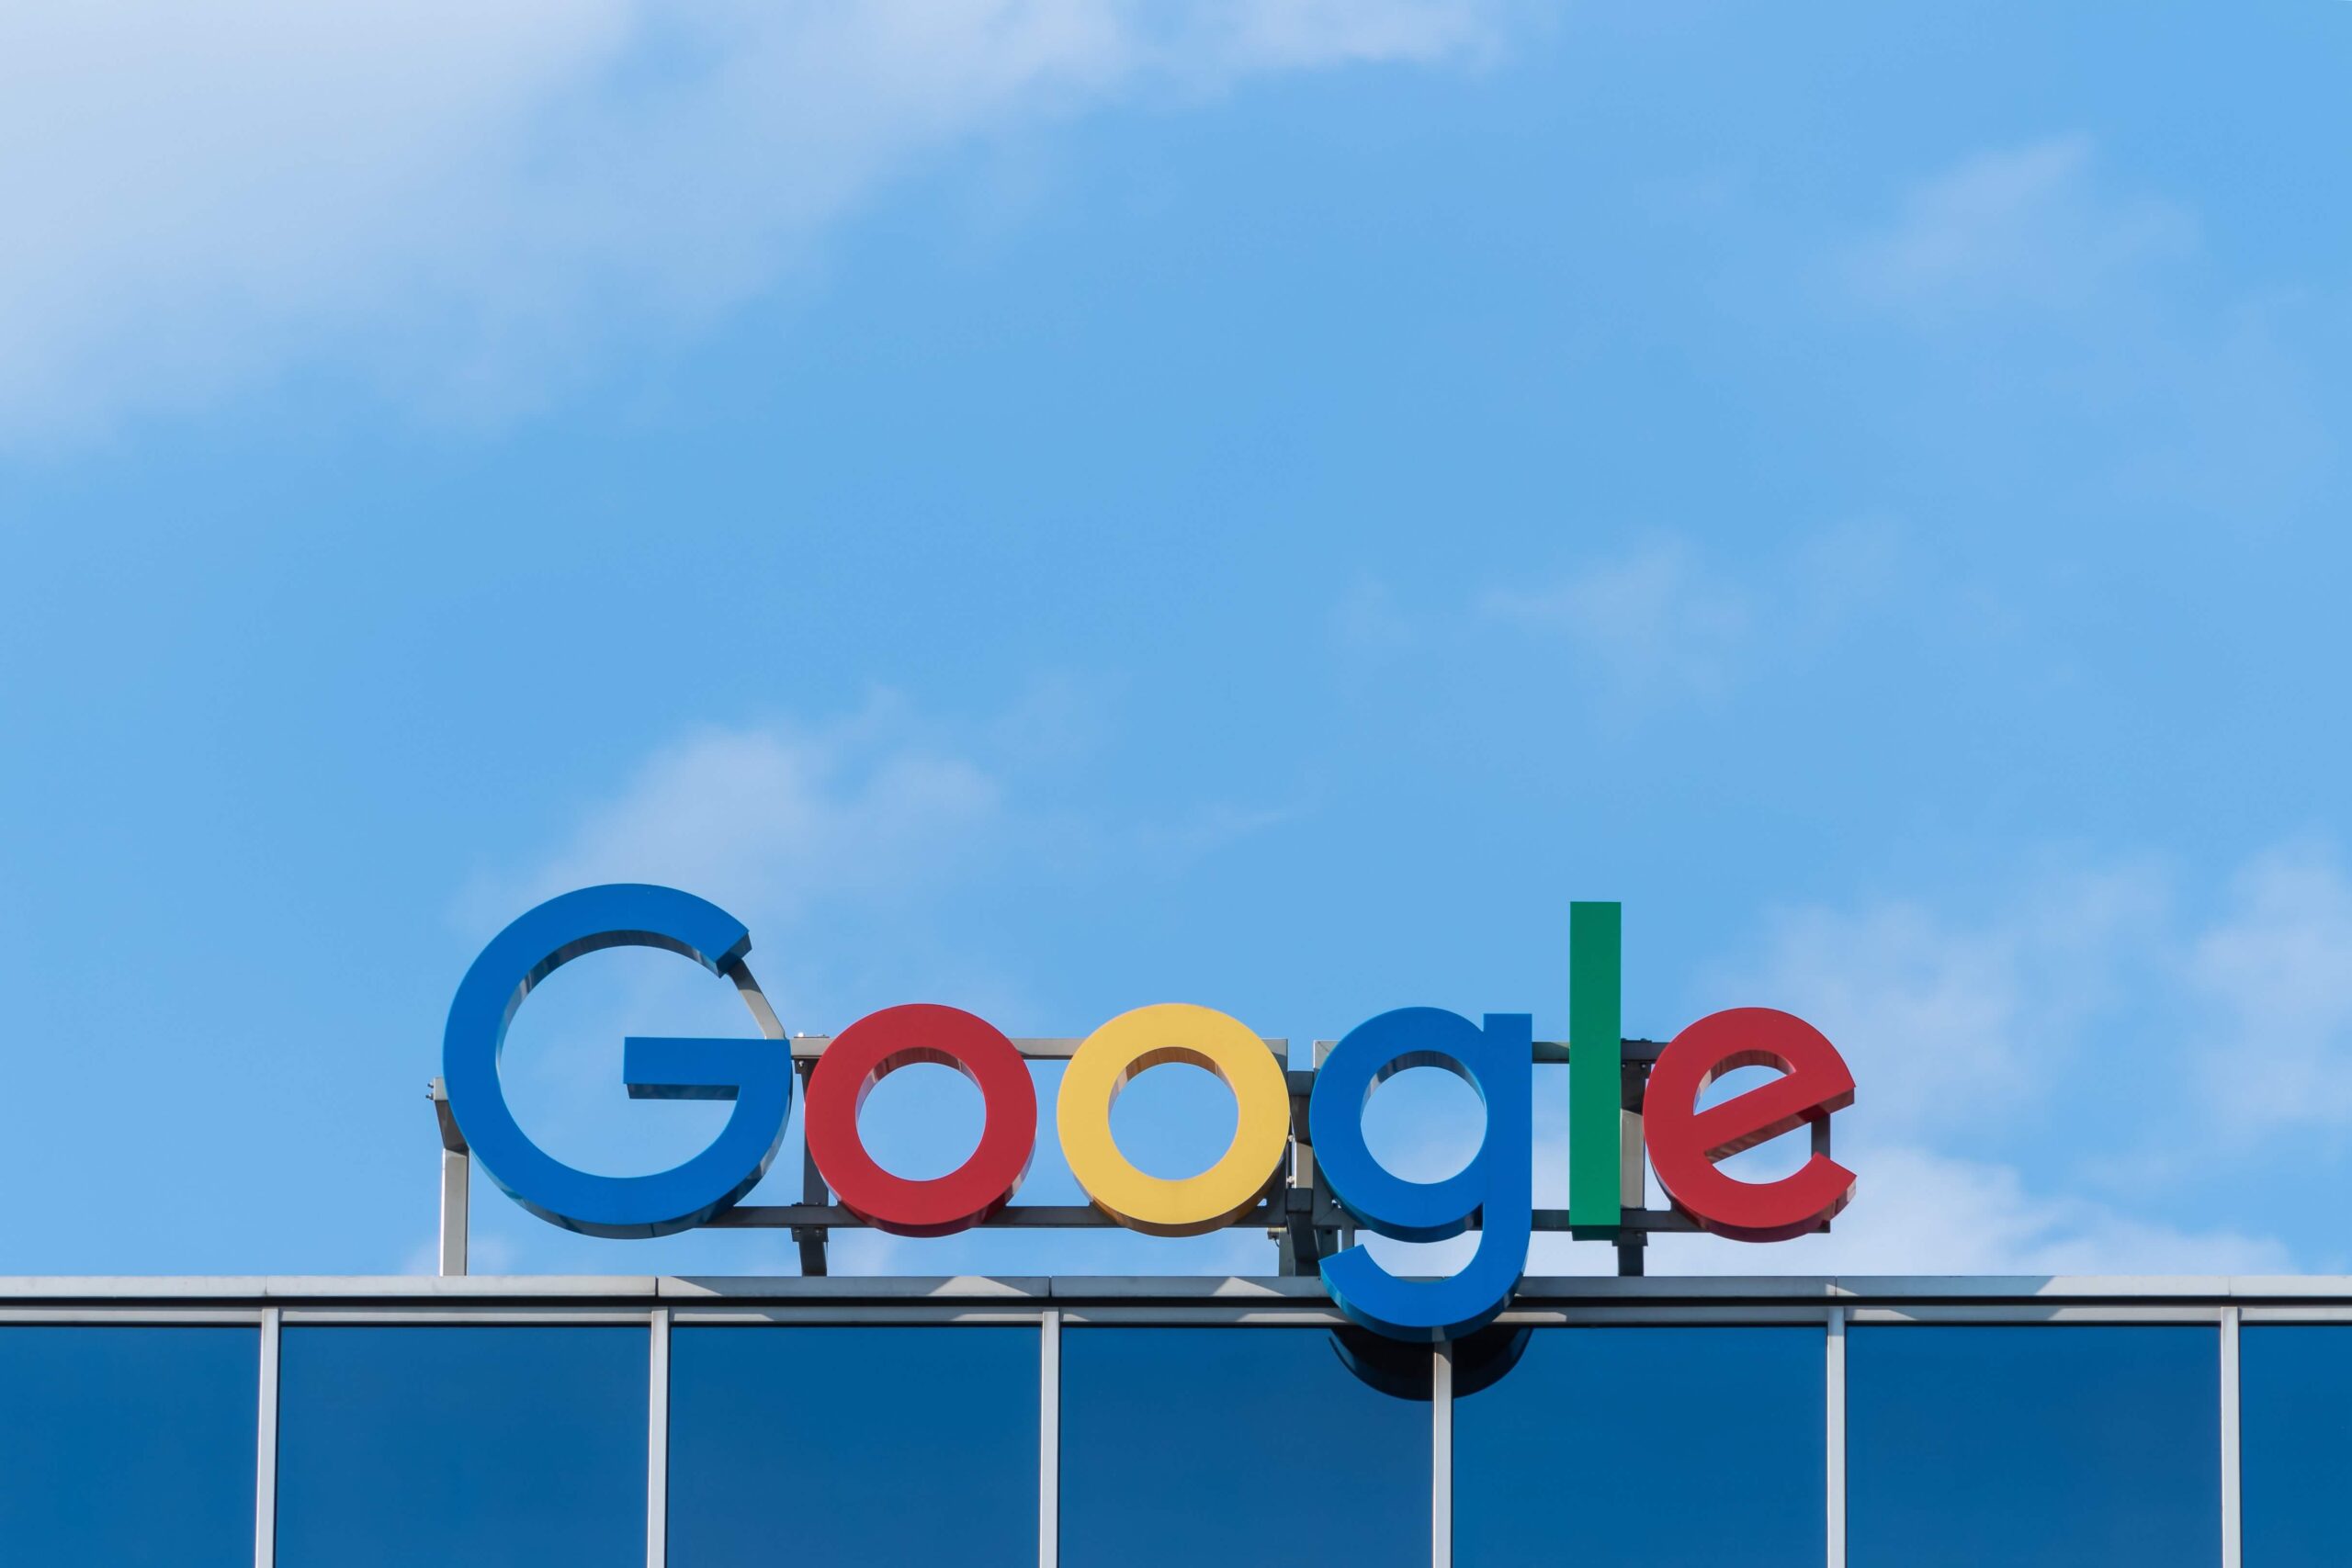 google sign with blue background